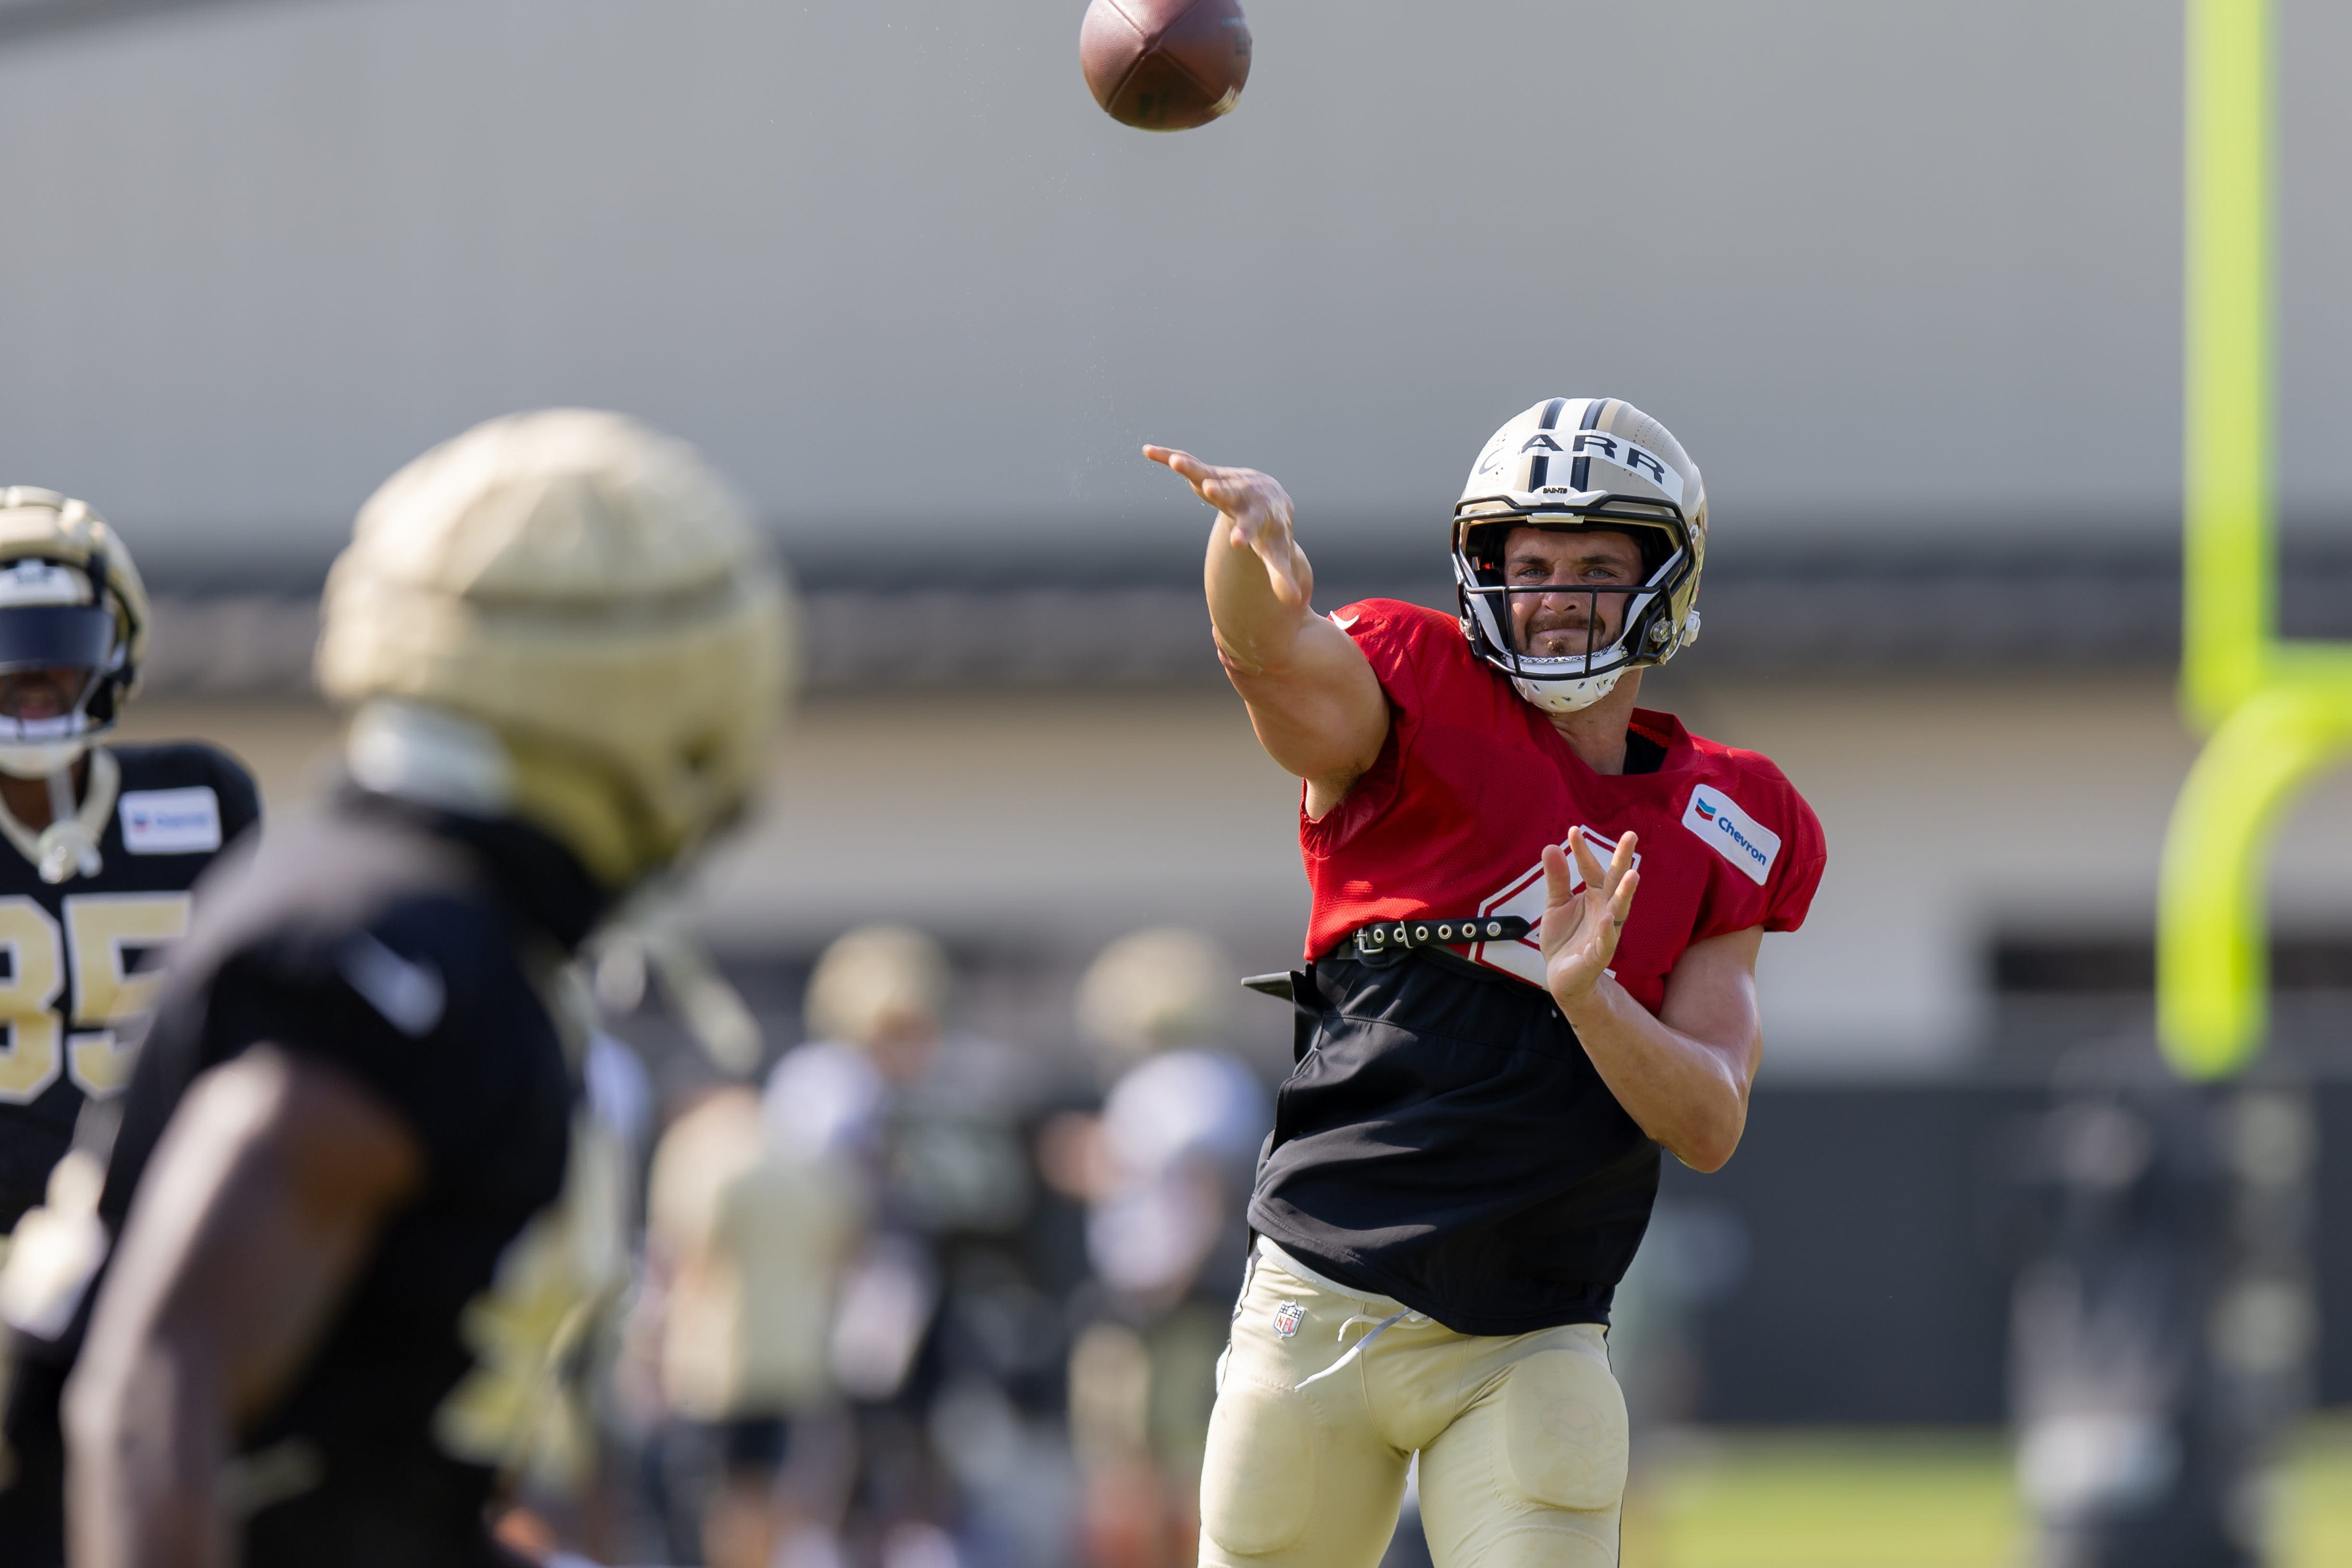 Sights and sounds from Day 9 at Saints training camp